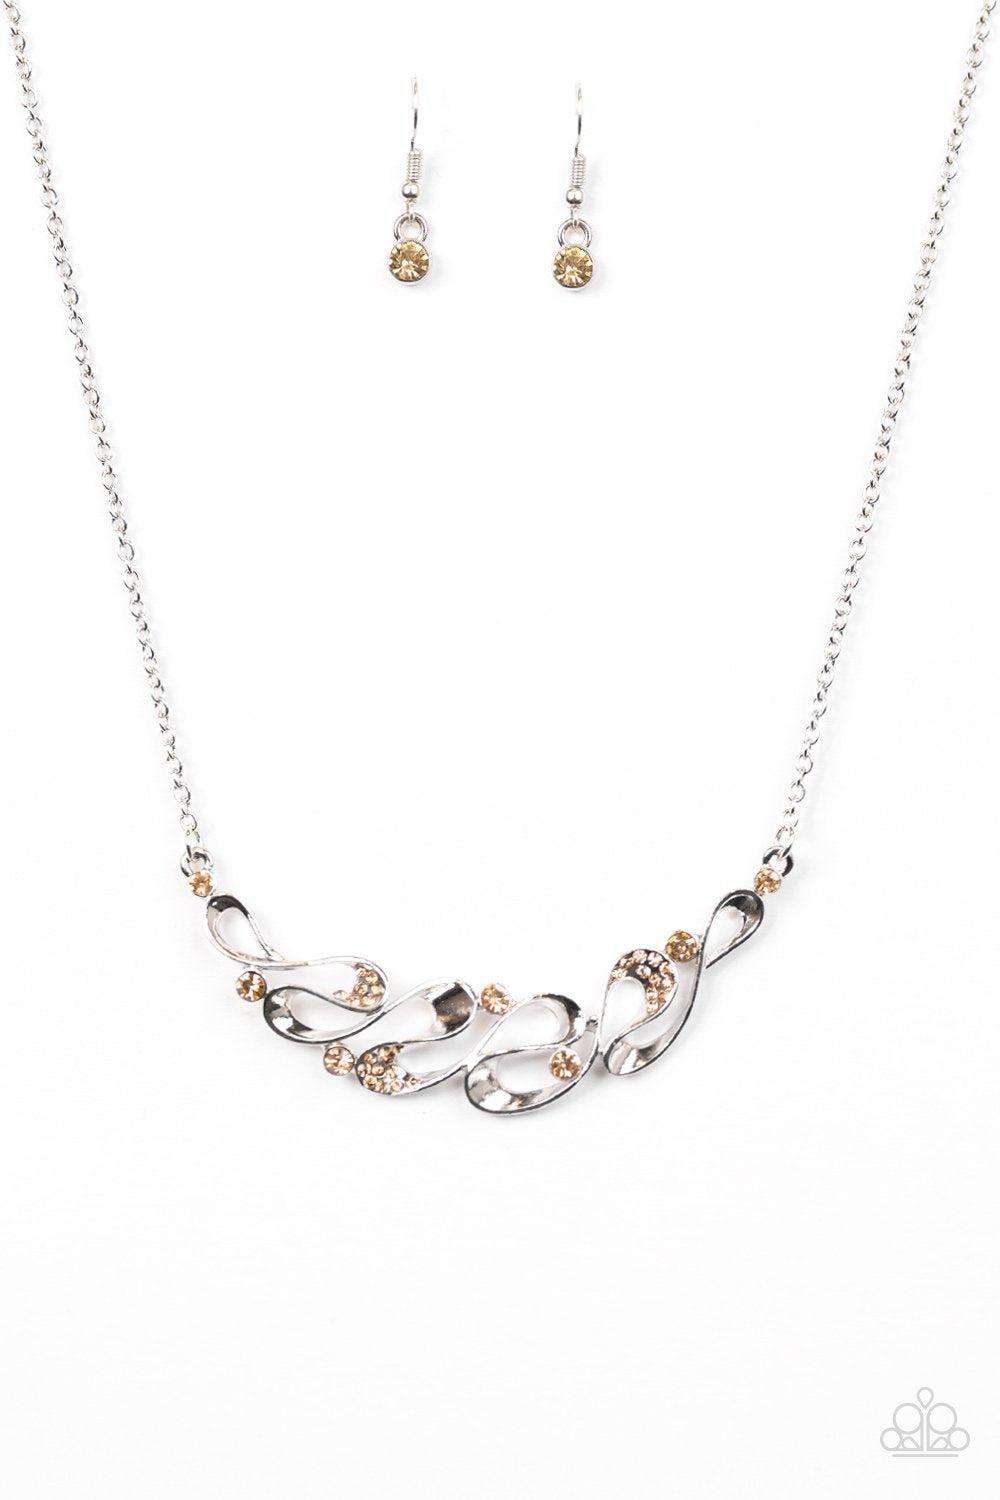 Easy Money Silver and Brown Gem Necklace - Paparazzi Accessories-CarasShop.com - $5 Jewelry by Cara Jewels